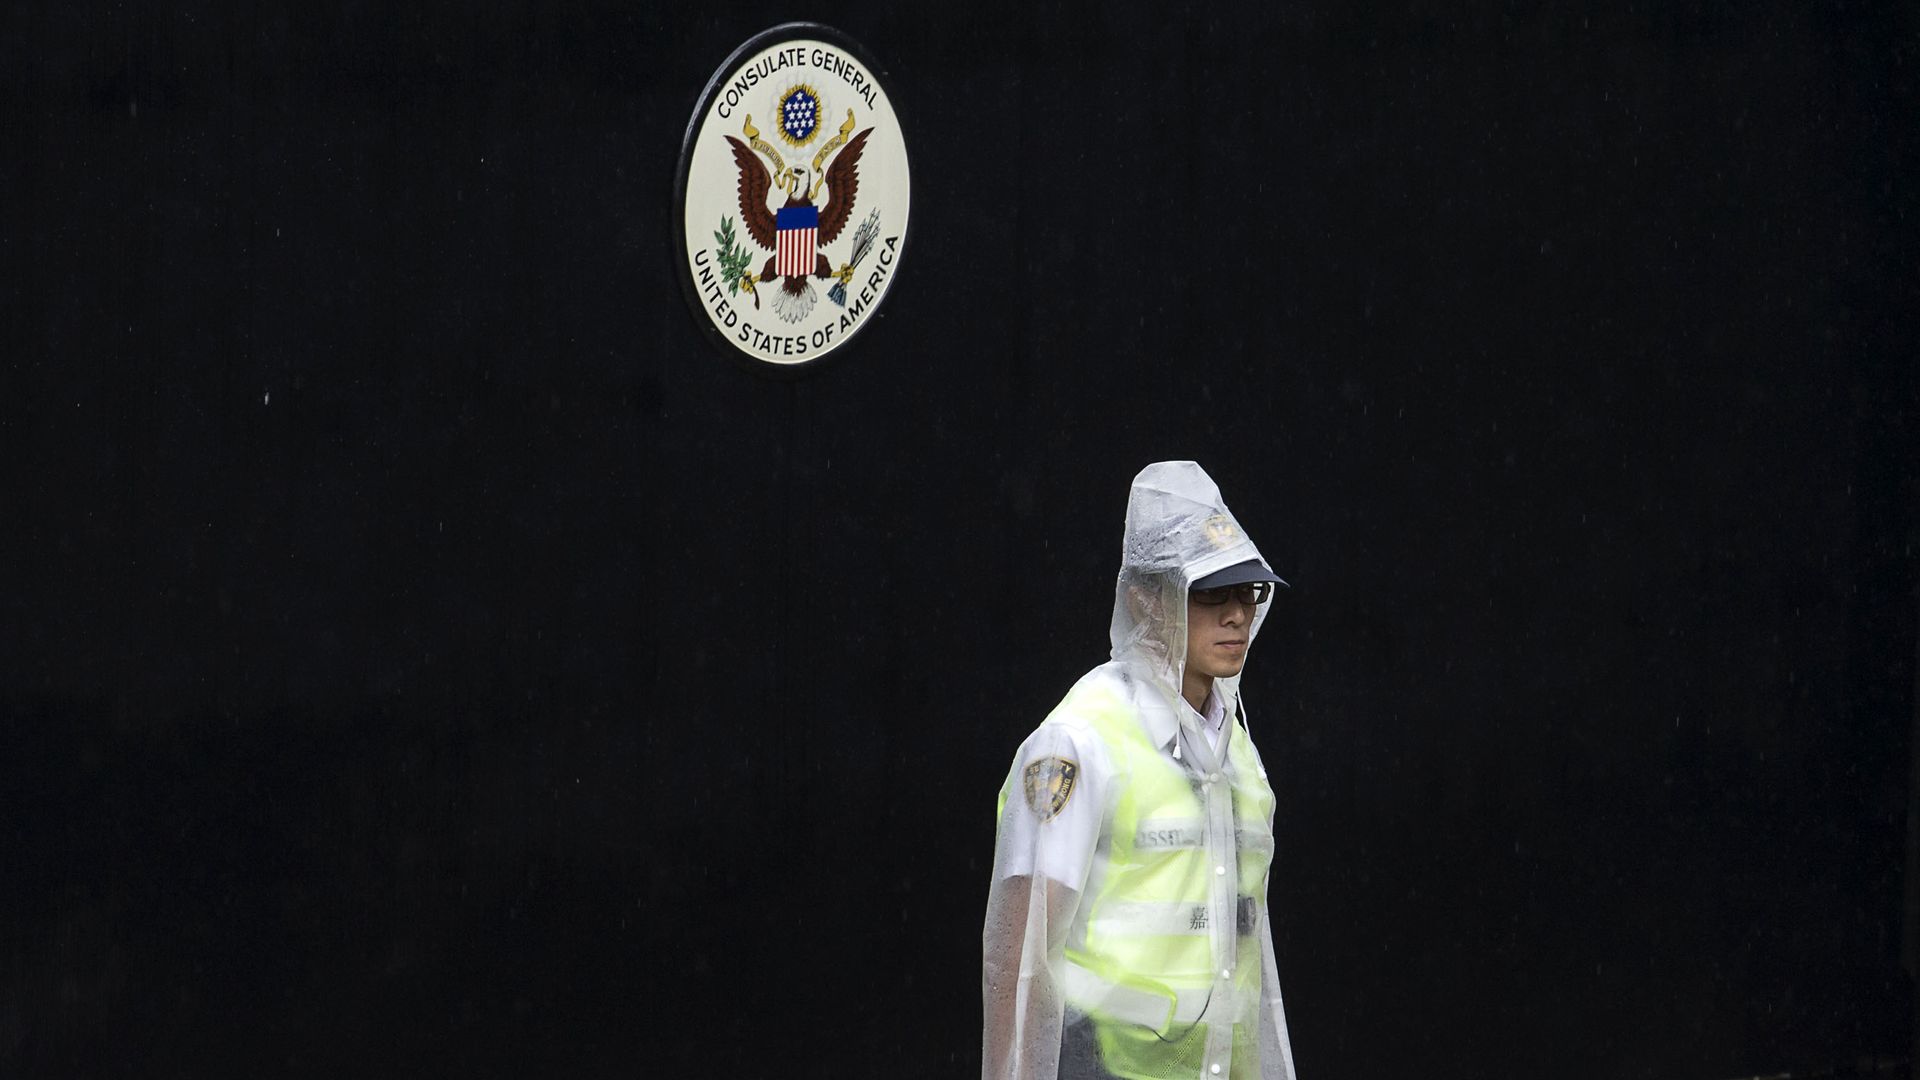 A police officer at the entry of a U.S. consulate in China.